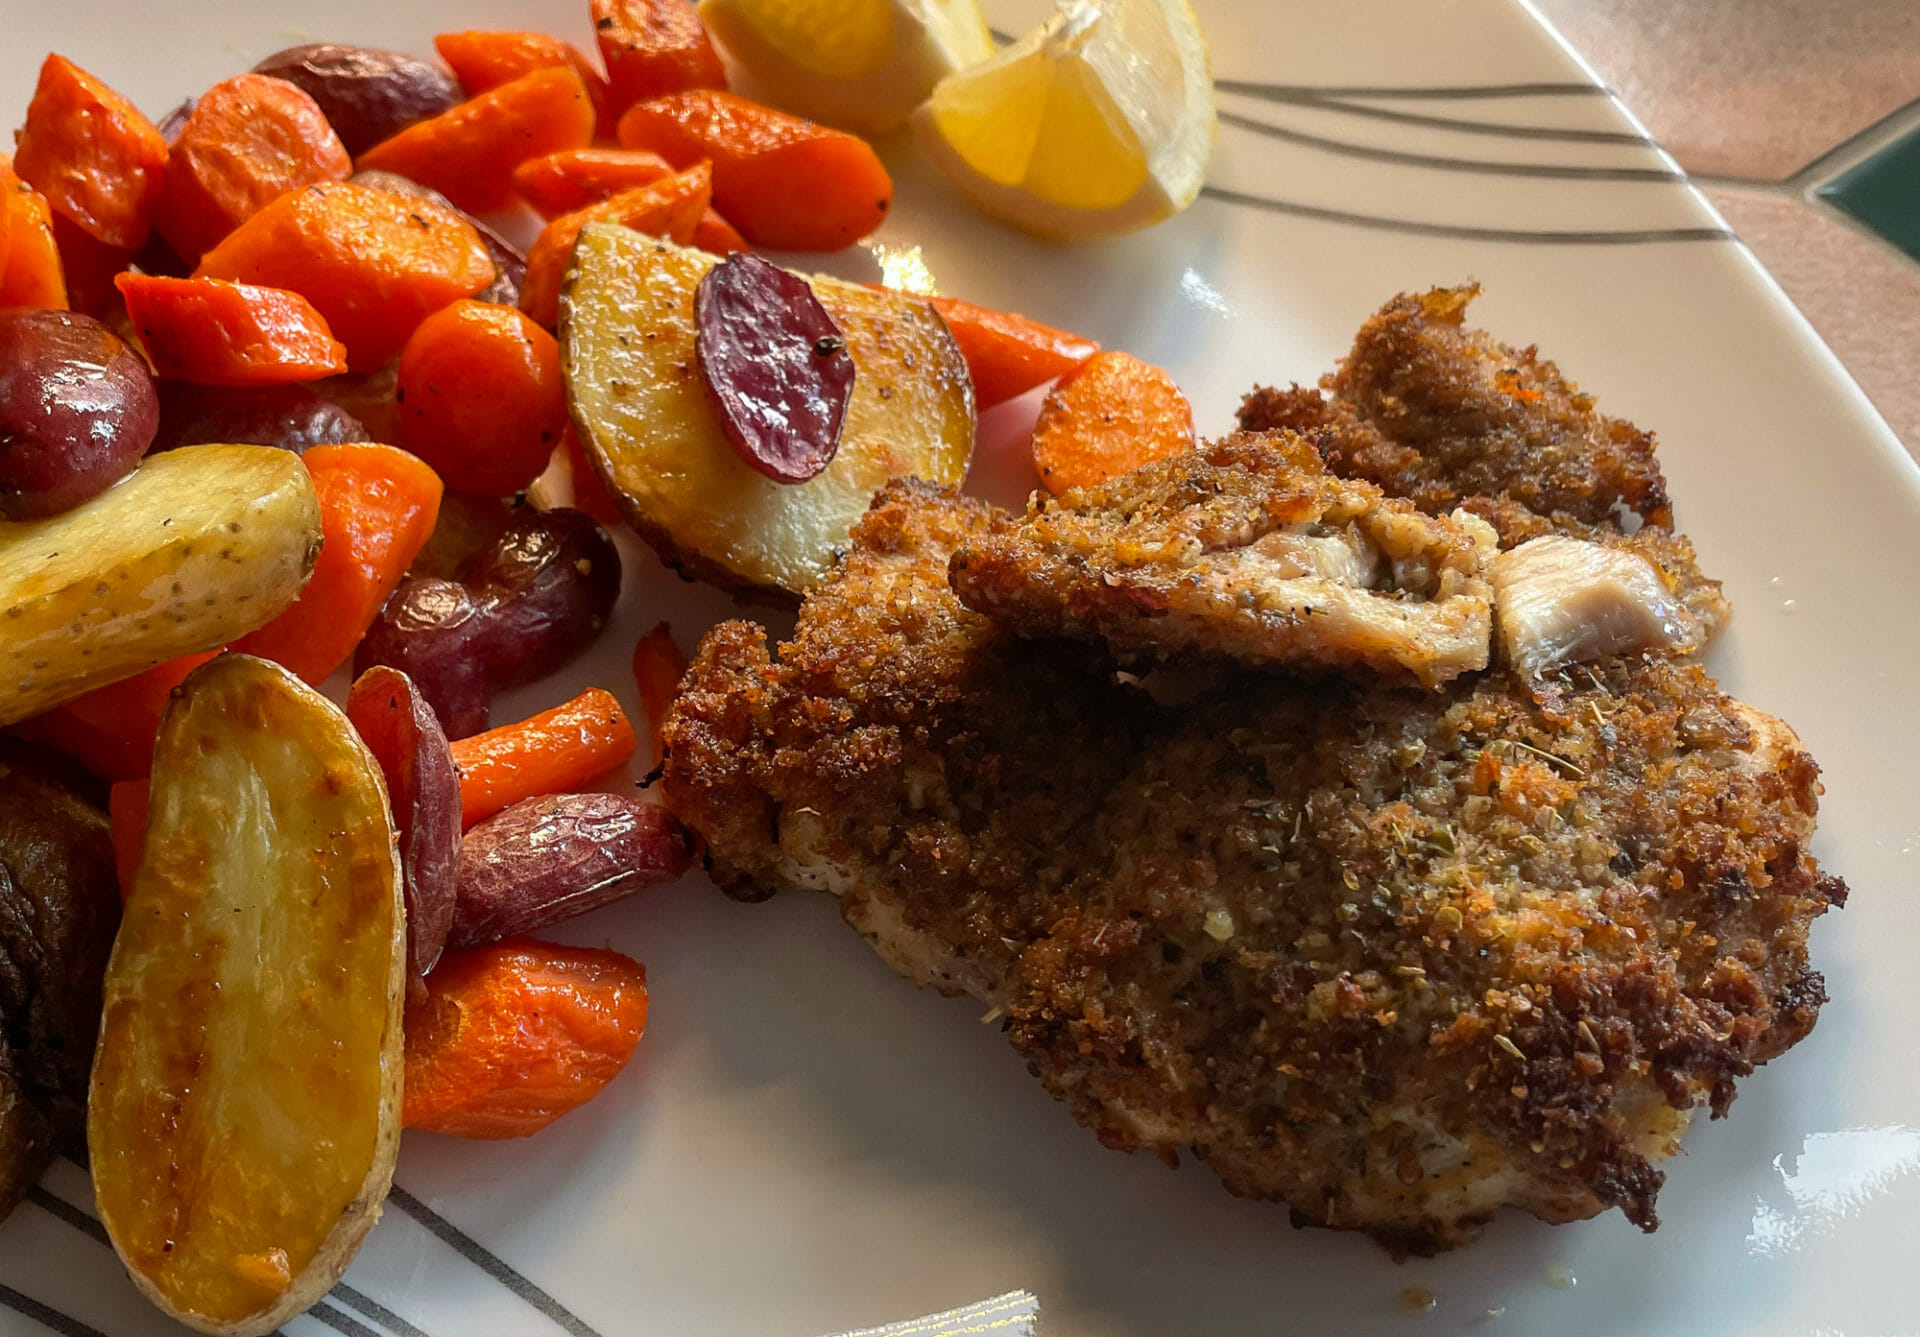 Crispy Lemon-Garlic Chicken with Roasted Potatoes and Carrots